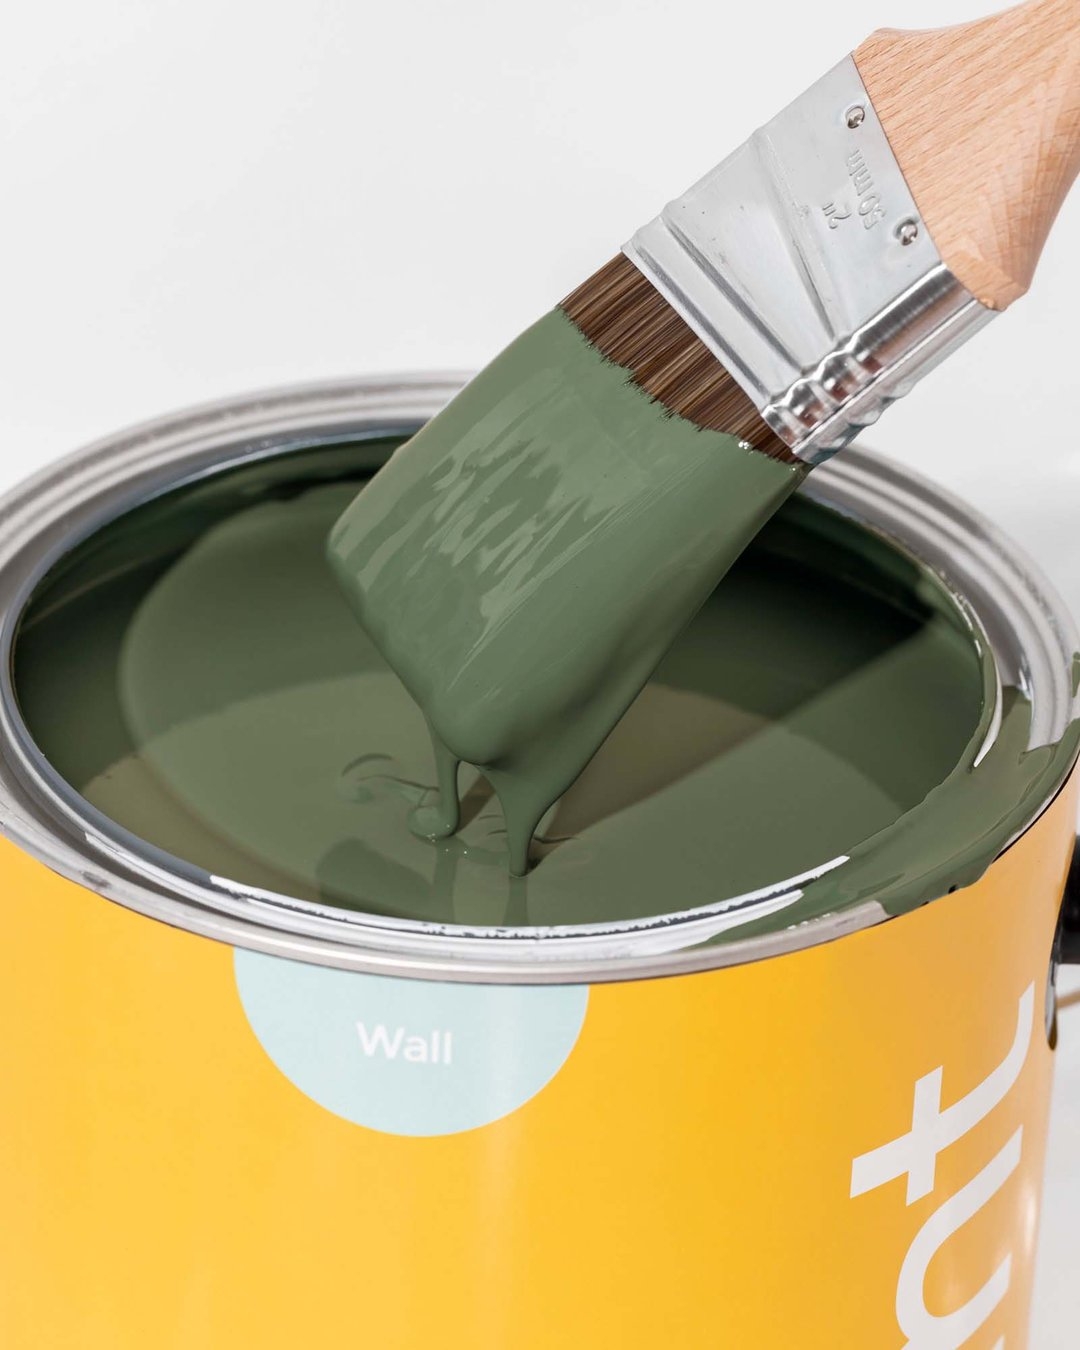 Clare x Pinterest: Daily Greens, Wall Paint Eggshell, Gallon - Image 1